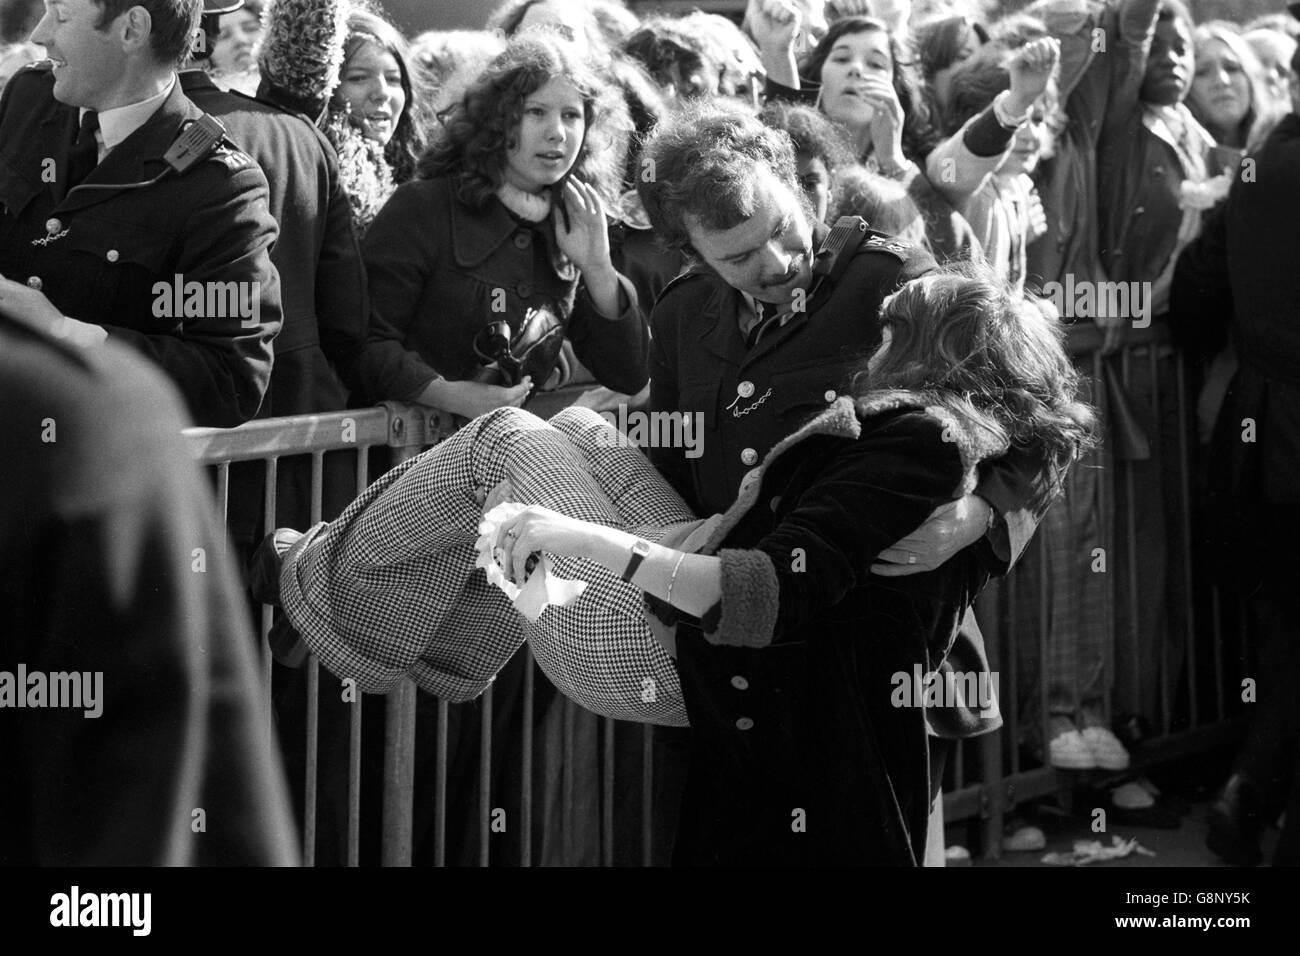 A young girl who fainted is carried from a crowd of screaming teenagers by a policeman as youngsters besiege the Rainbow Theatre in Finsbury Park, London. The teens are hoping to buy tickets for The Osmonds concert in October. All the tickets had been sold. Stock Photo